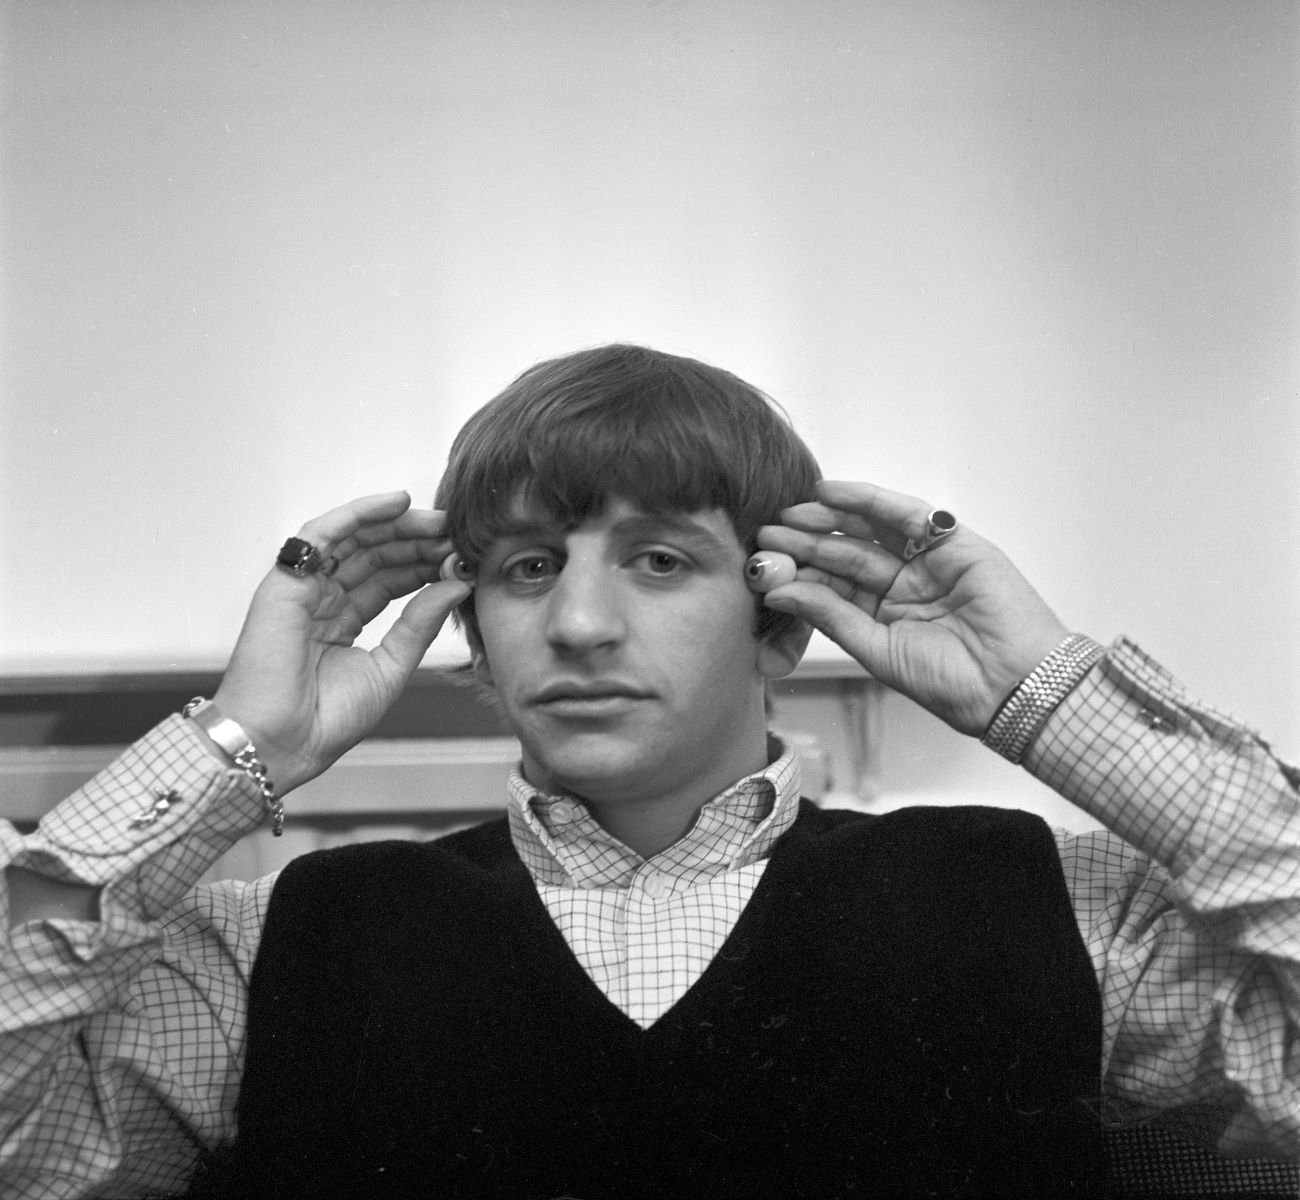 A black and white picture of Ringo Starr holding fake eyeballs next to his face.